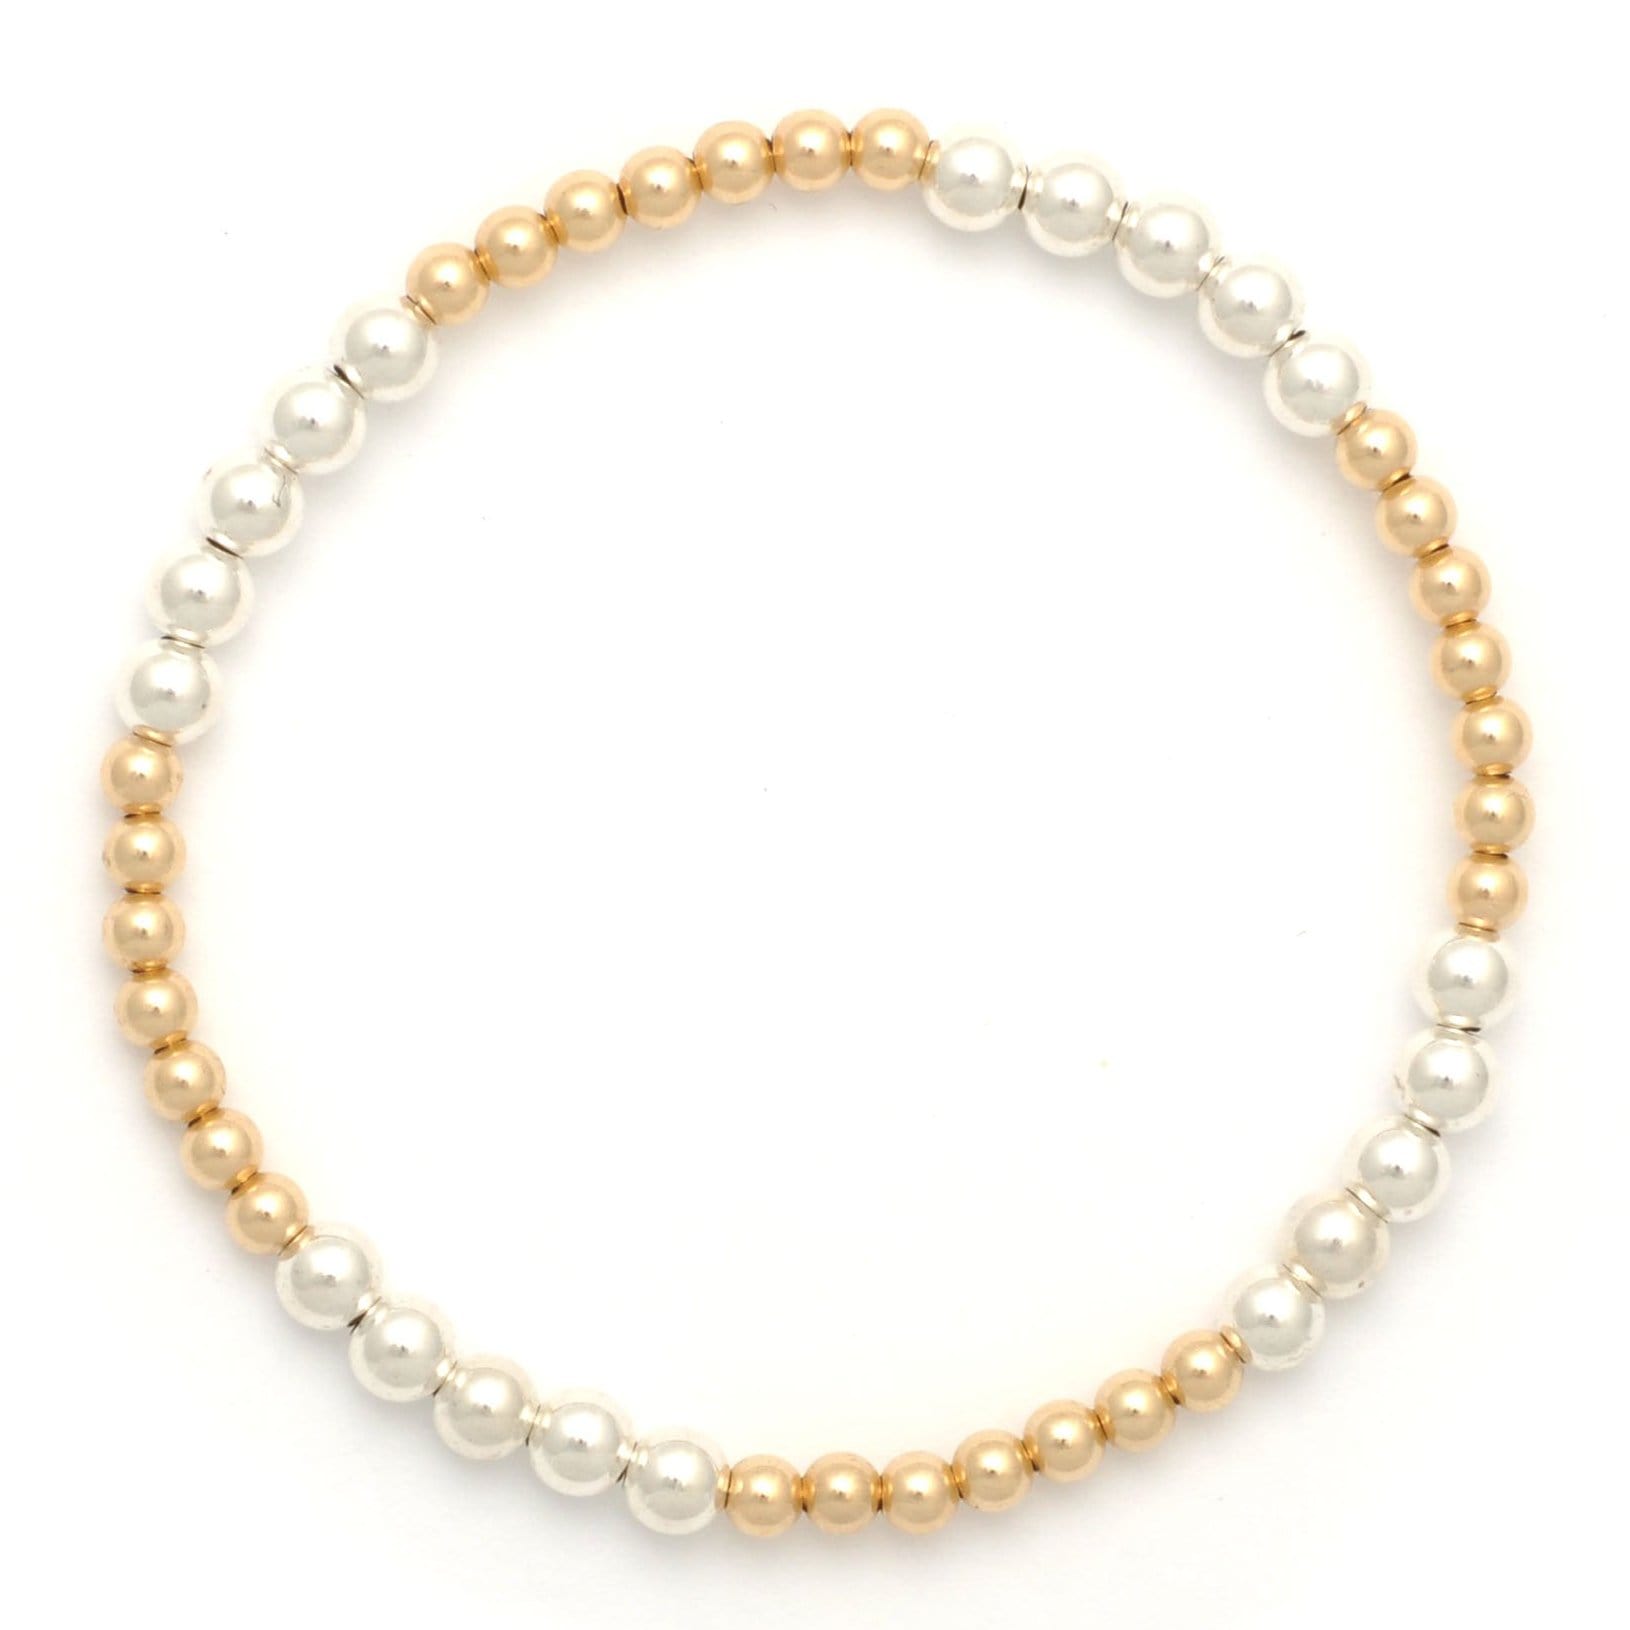 Karen Lazar 3mm Two Tone Silver and Gold Bead Bracelet - Curated Los Angeles